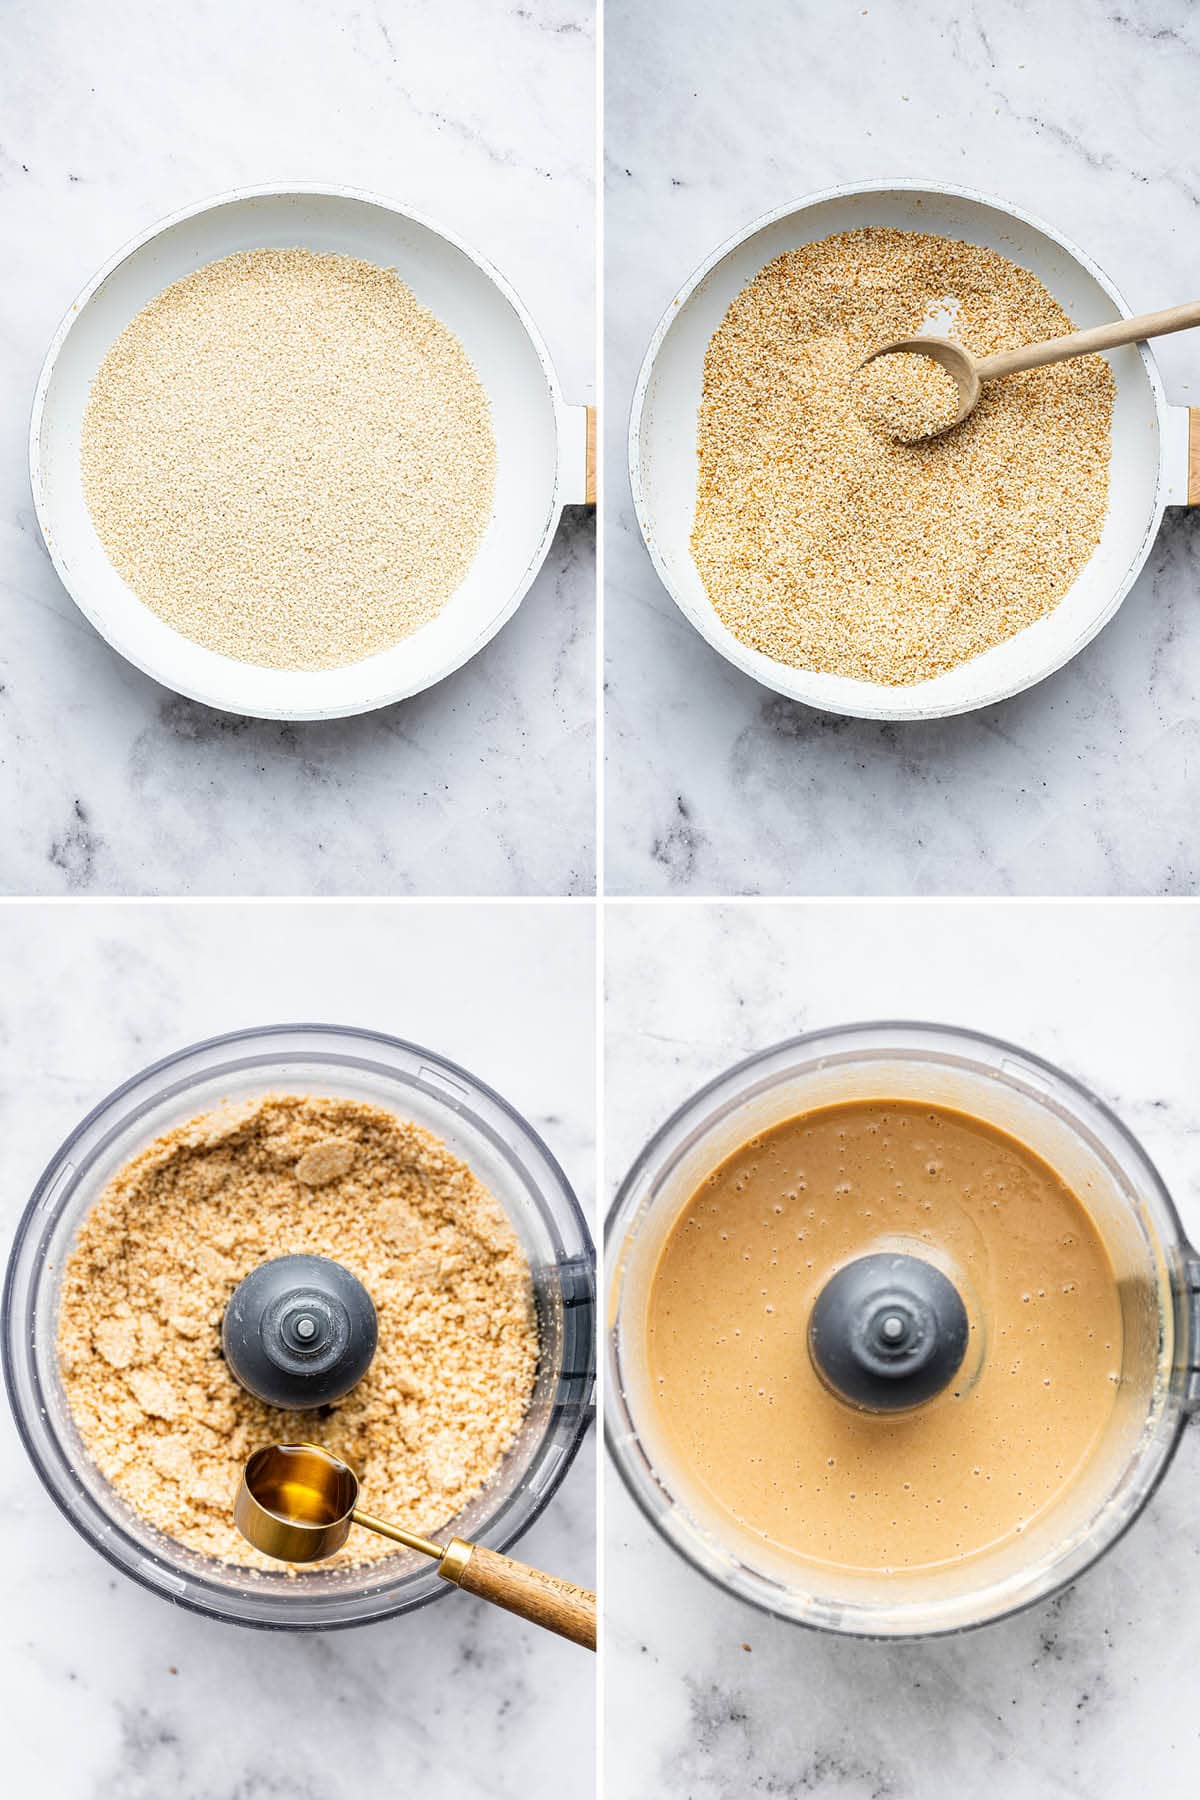 Four photos showing the process to make tahini: toasting sesame seeds, blending in food processor and adding a little oil to make smooth.